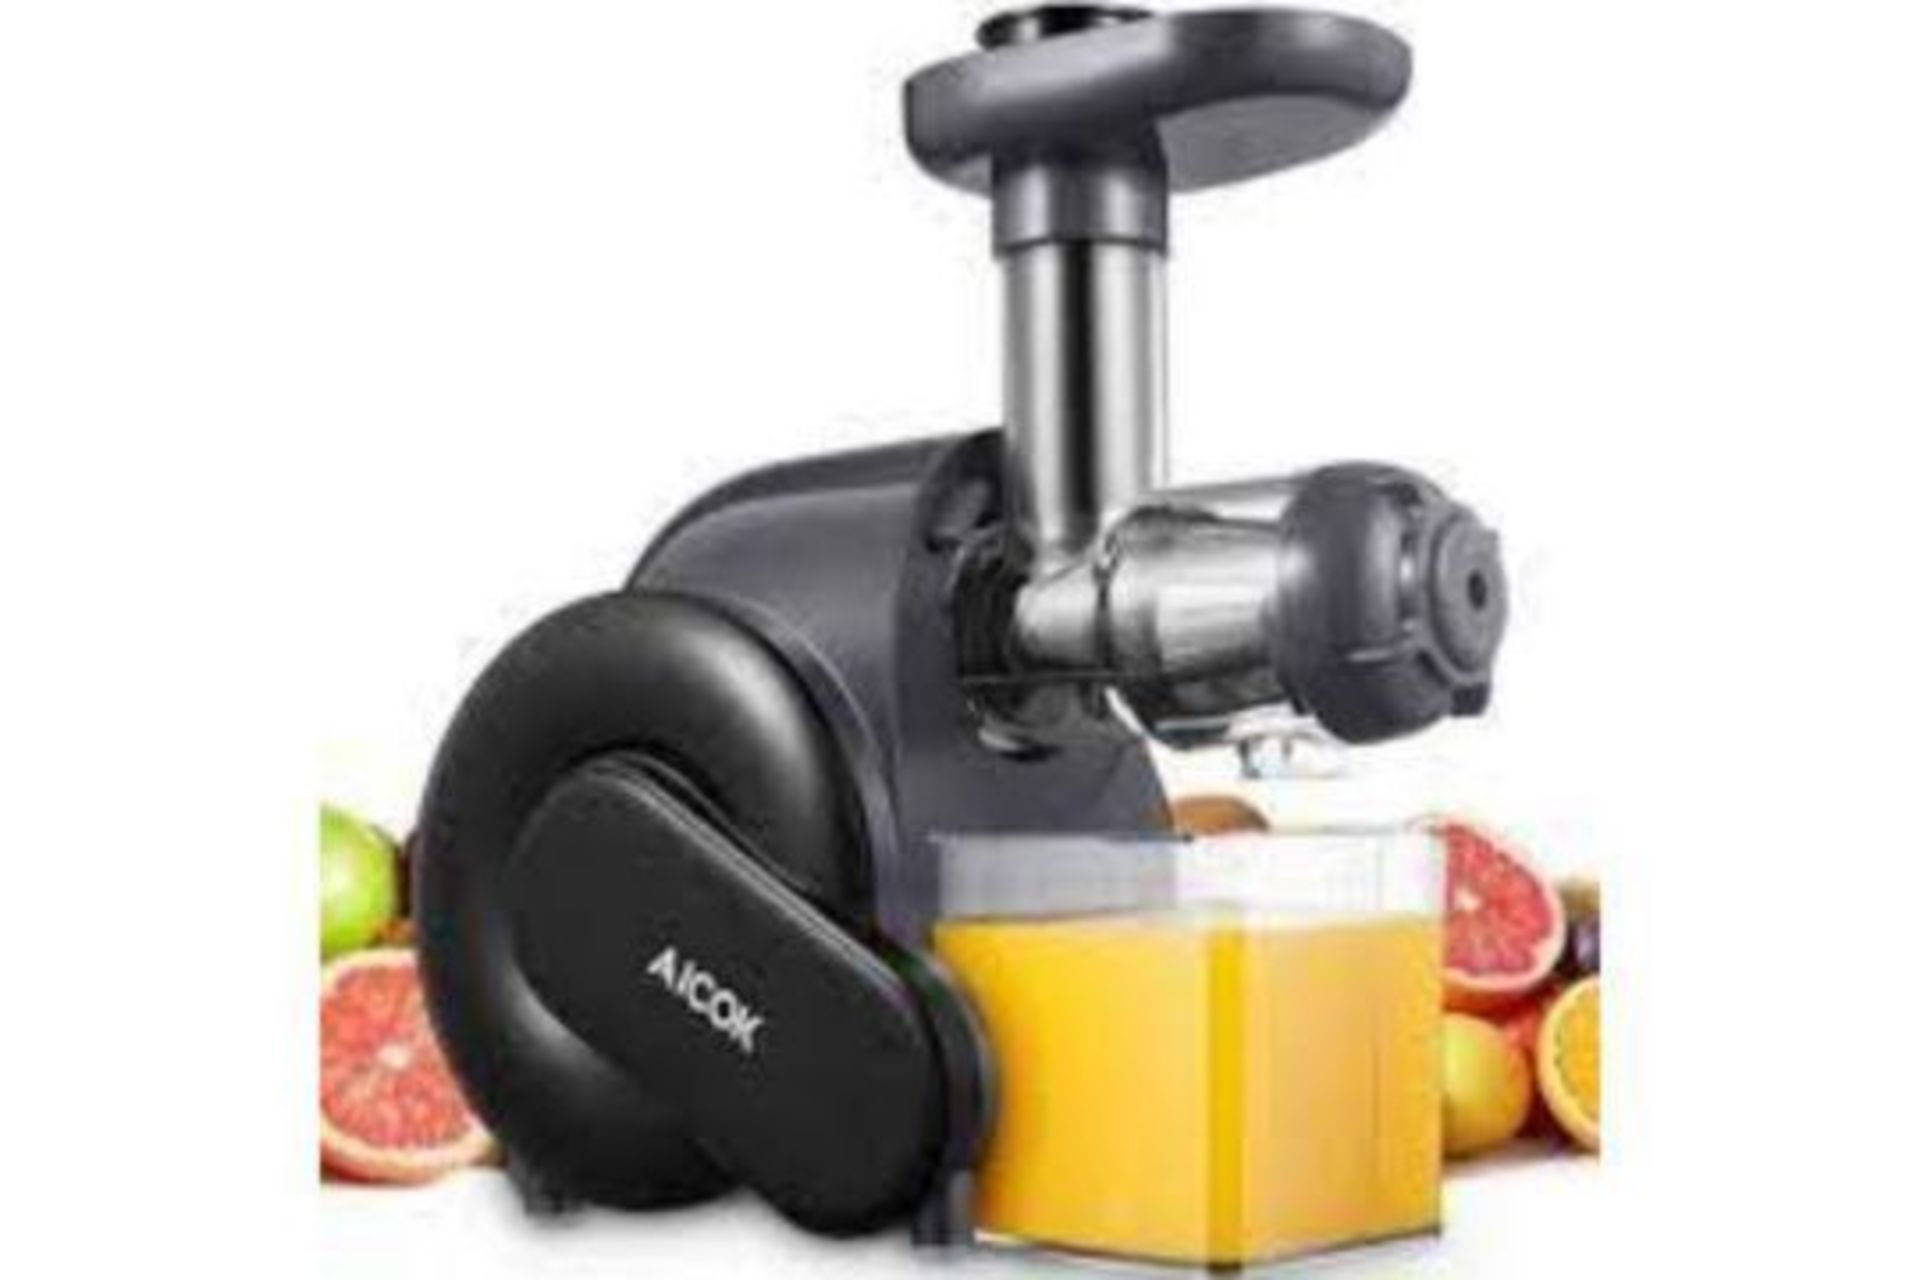 NEW BOXED AICOK AMR-519 Masticating Juicer. (AMR519-ROW11) Can juice dense fruits and vegetables,